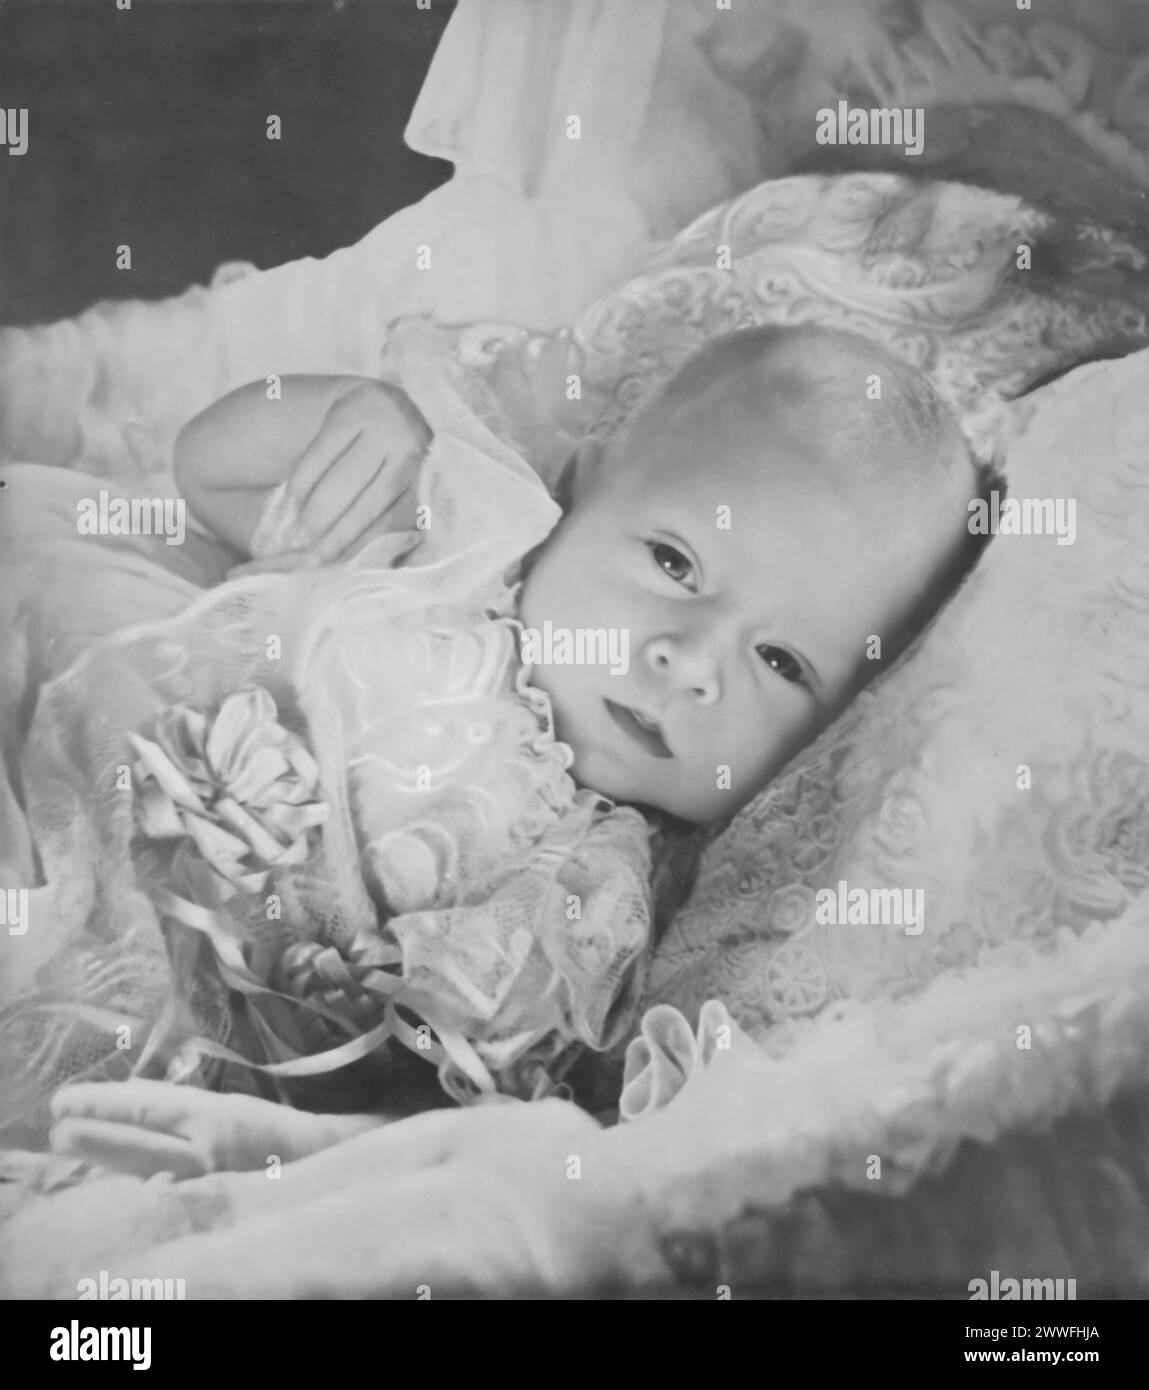 A photograph shows the newly born Prince Charles III laying in his cot.Taken in November 1949, this image marks the arrival of a significant figure in the British royal lineage. Stock Photo